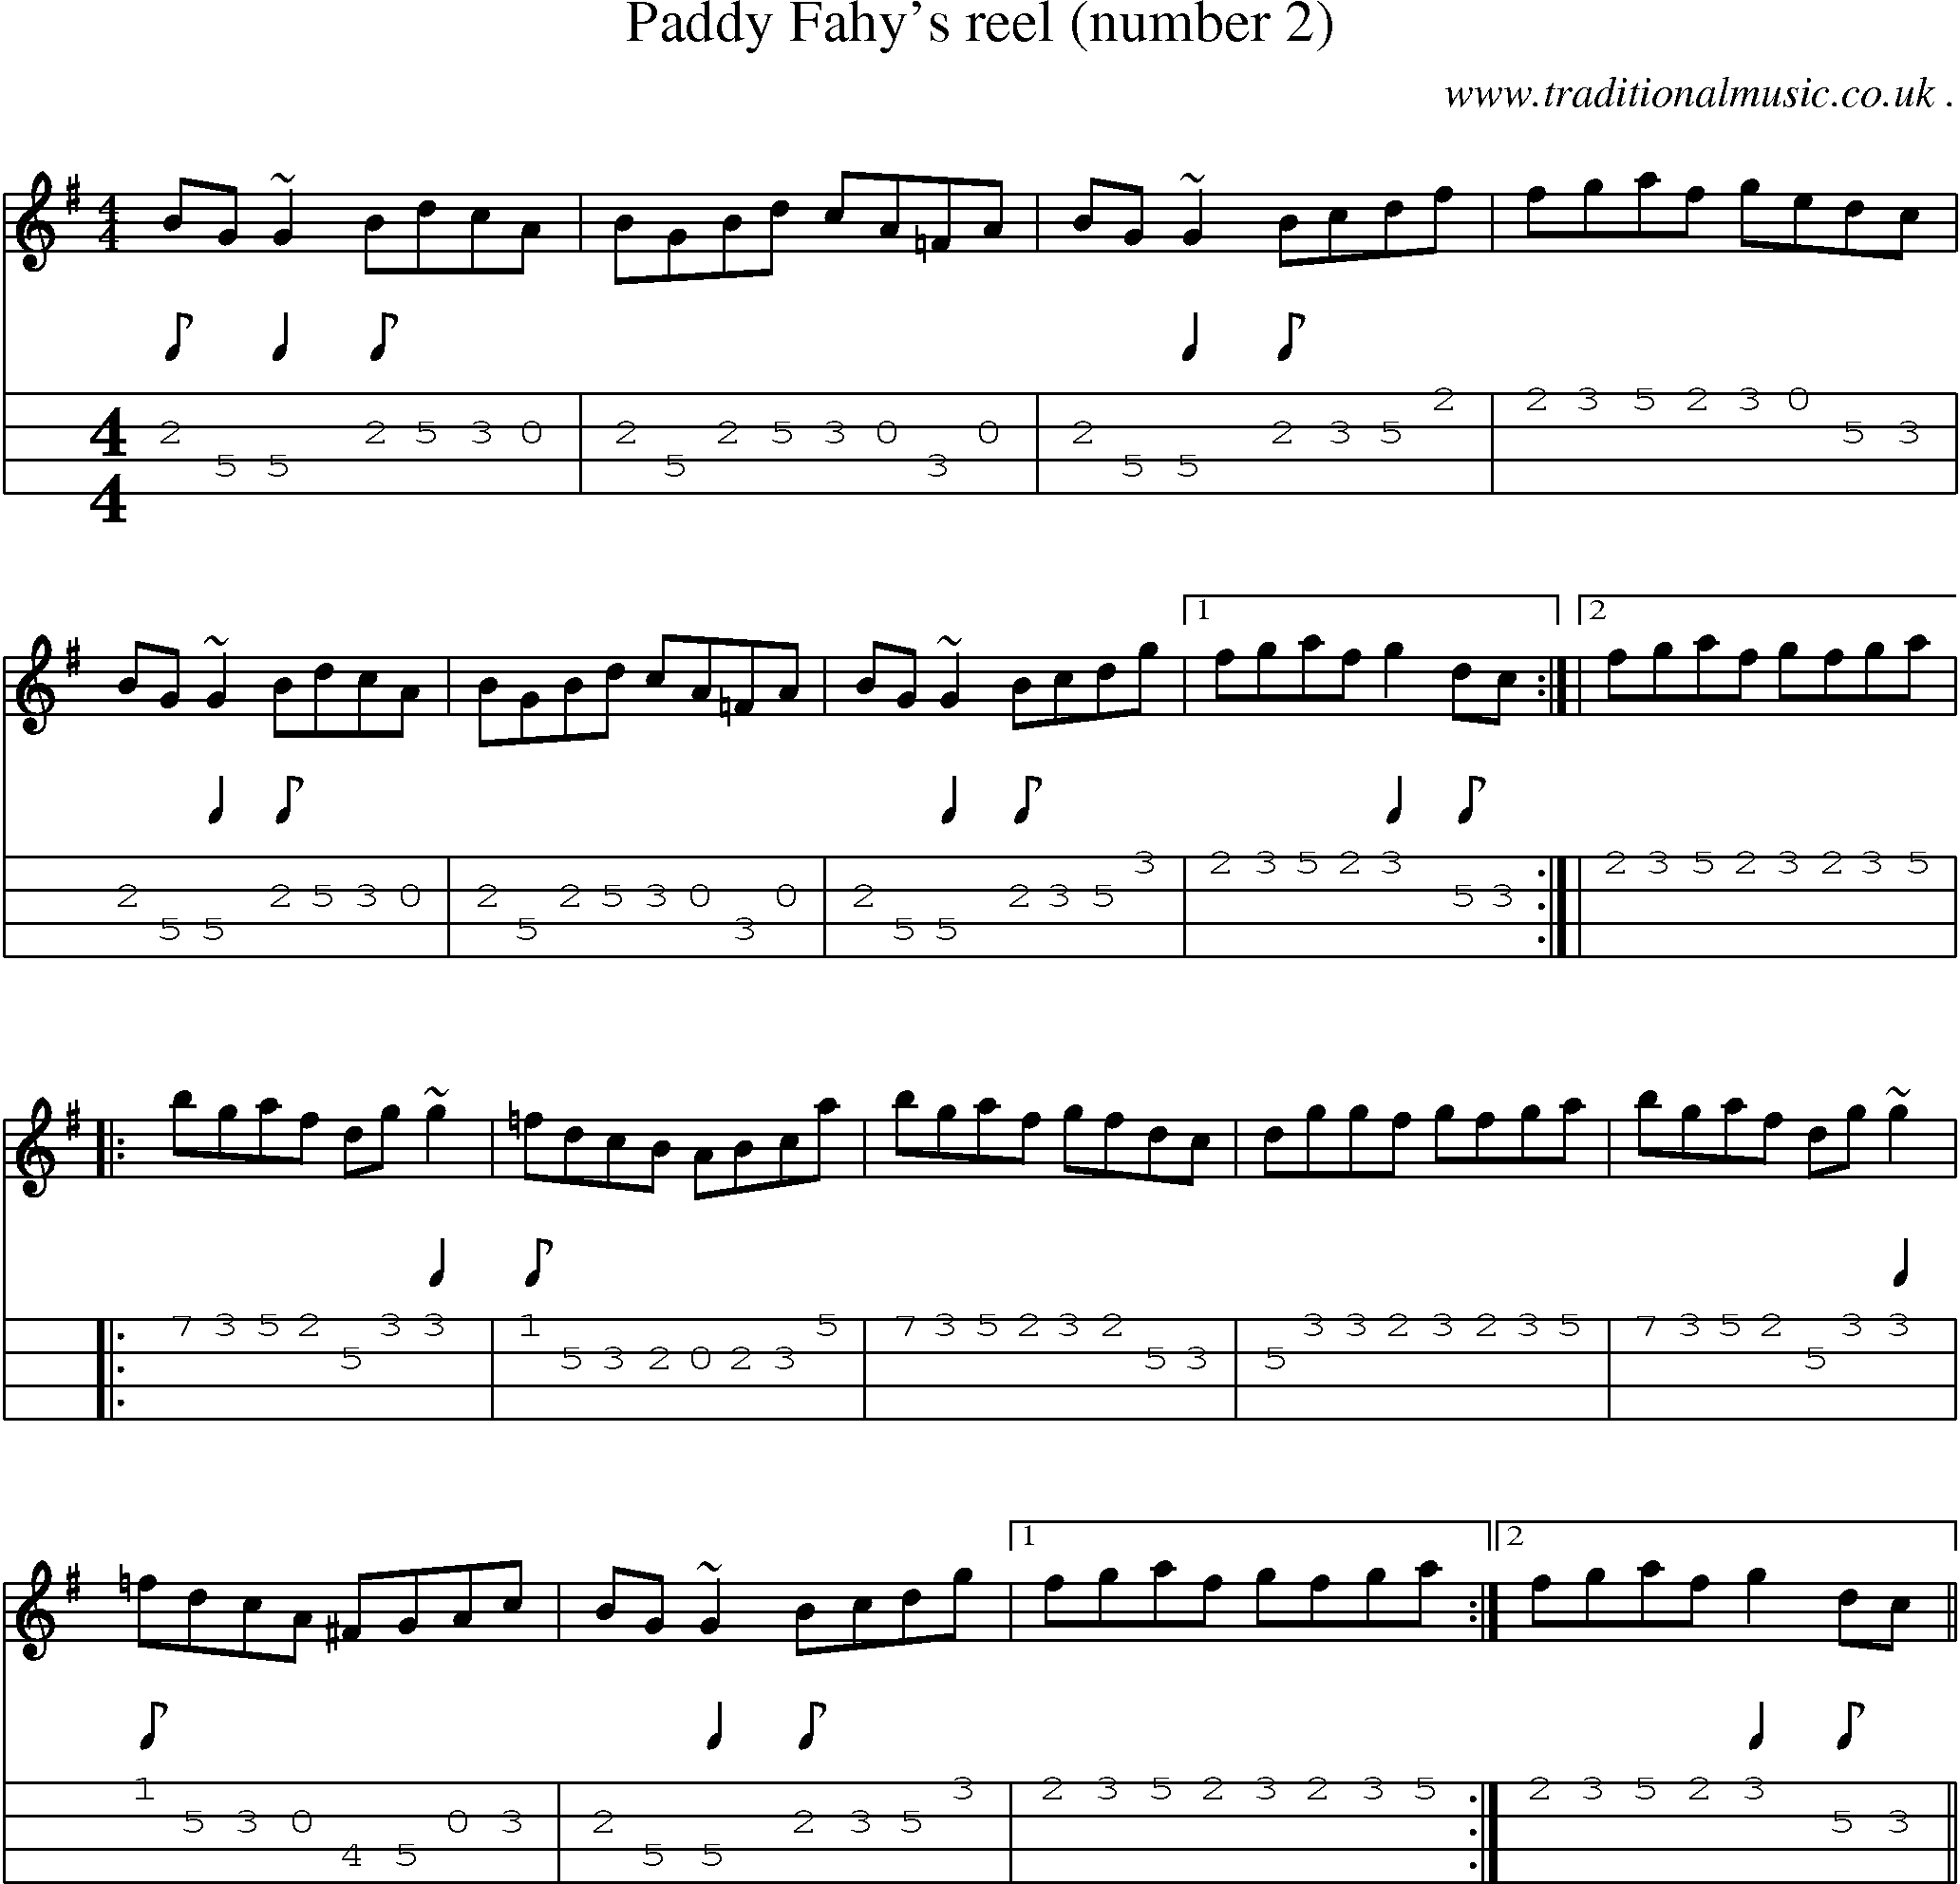 Sheet-music  score, Chords and Mandolin Tabs for Paddy Fahys Reel Number 2